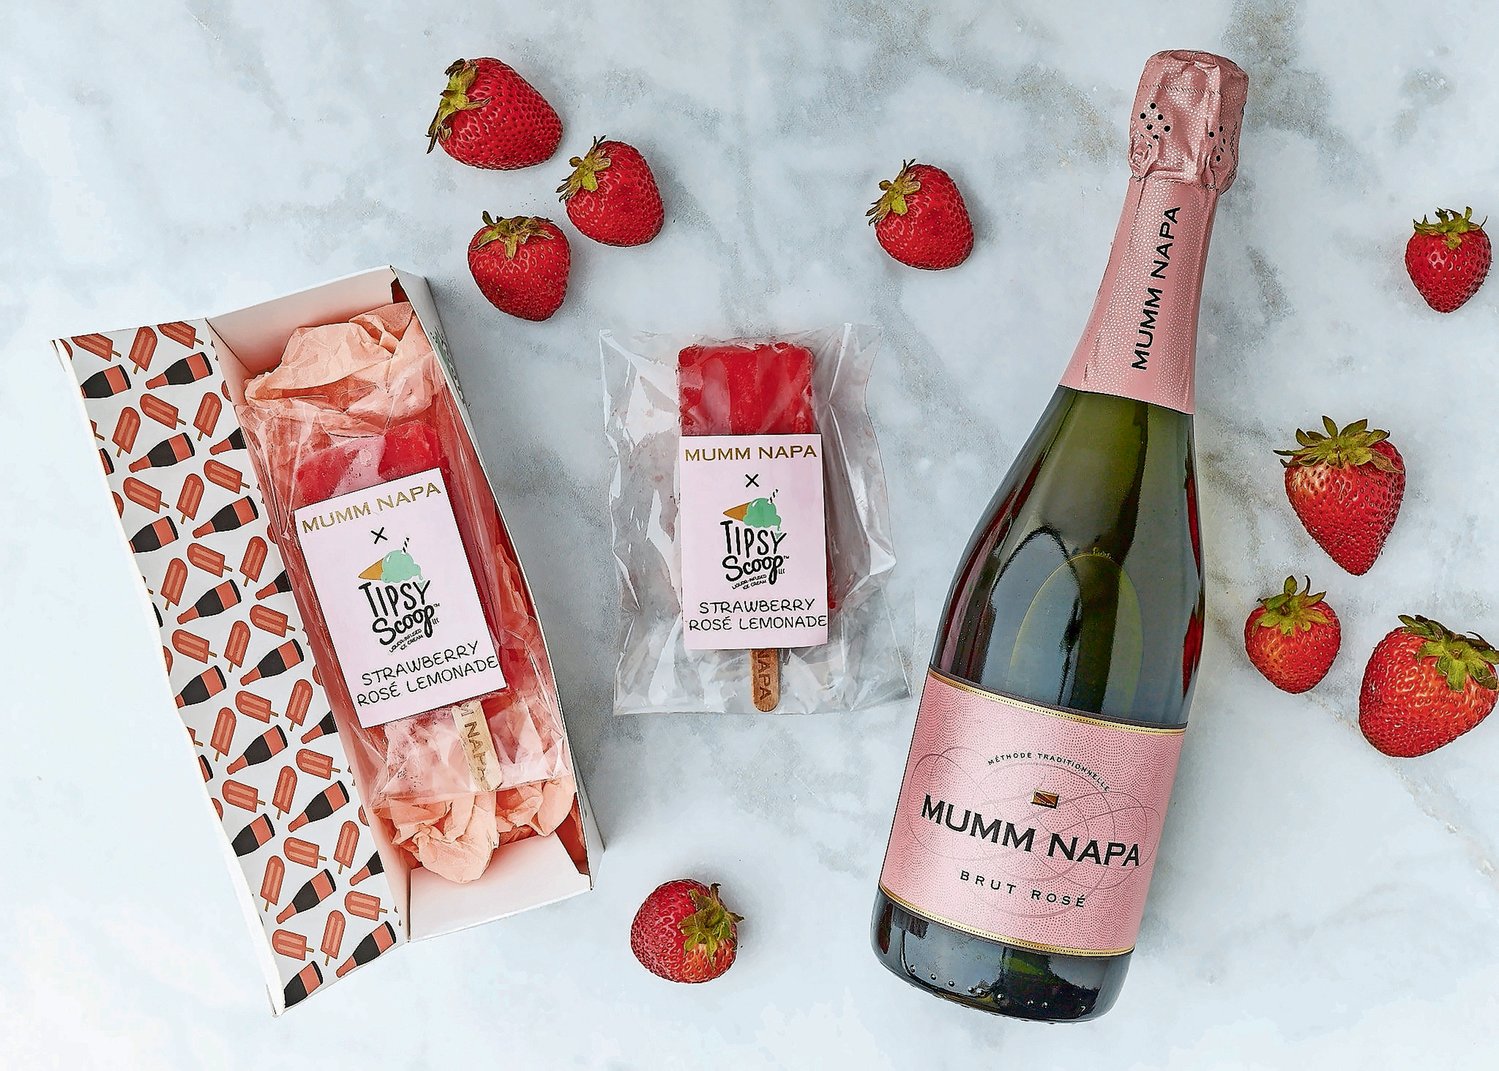 One of the latest creations from Tipsy Scoop is the Mumm Napa Brut Rosé Strawberry Lemonade Popsicle, released late June.